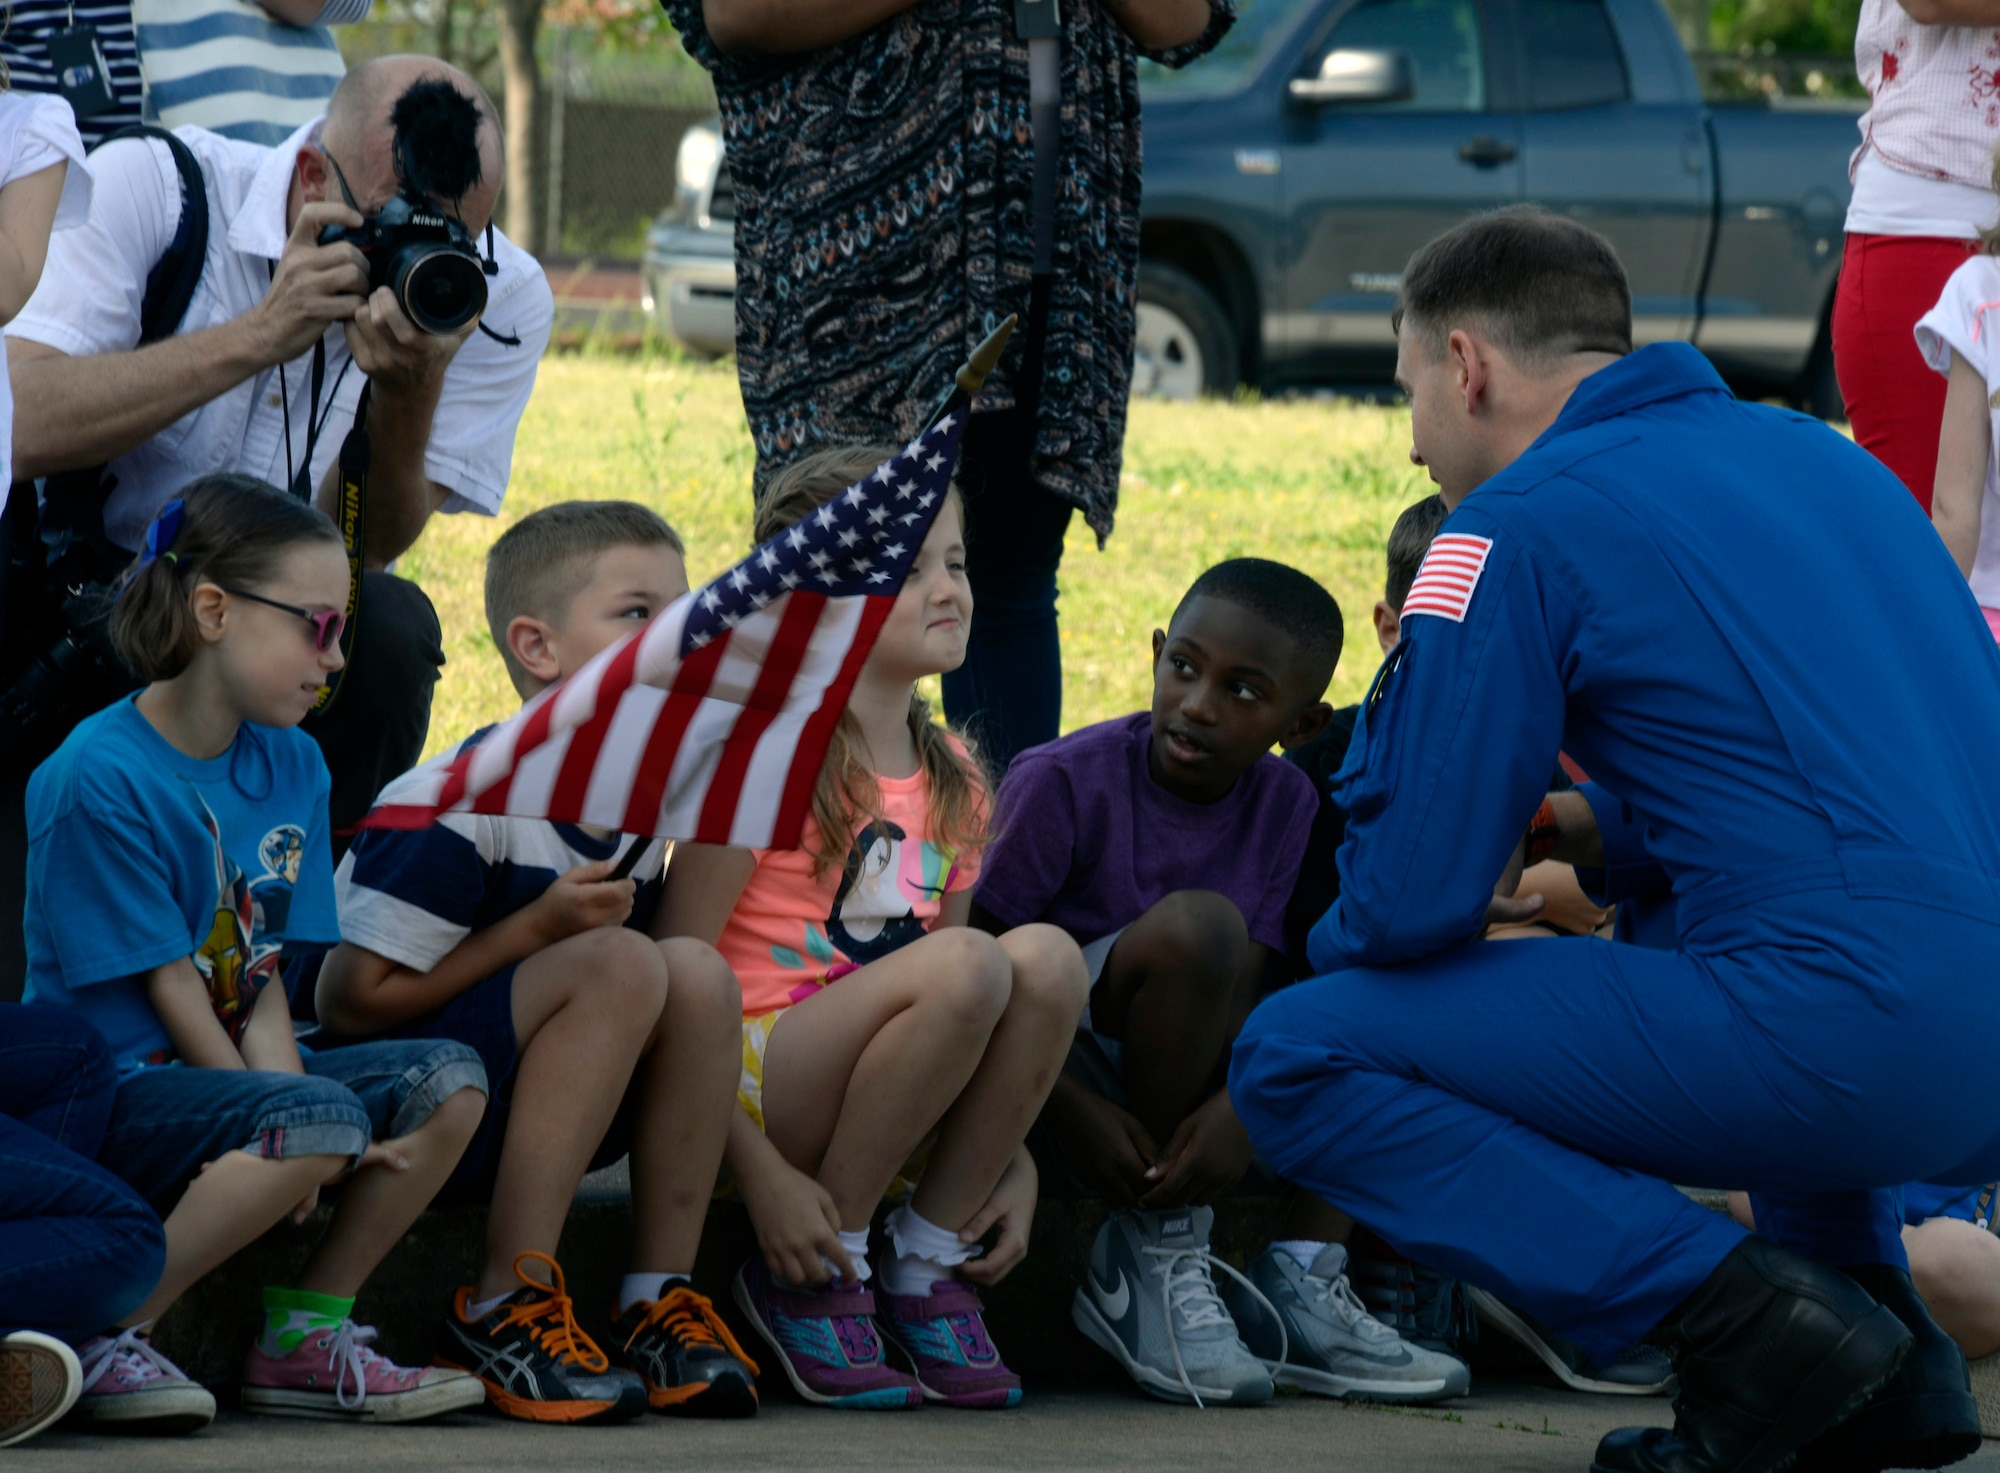 First grade students speak to Air Force Lt. Col. Tyler Hague, NASA astronaut, during his visit to Maxwell Elementary School on Maxwell Air Force Base, Ala., April 20, 2016. Hague visited the school to speak to a few of the students about how he became an astronaut and what difficulties astronauts face in space. (U.S. Air Force photo/Senior Airman Tammie Ramsouer)